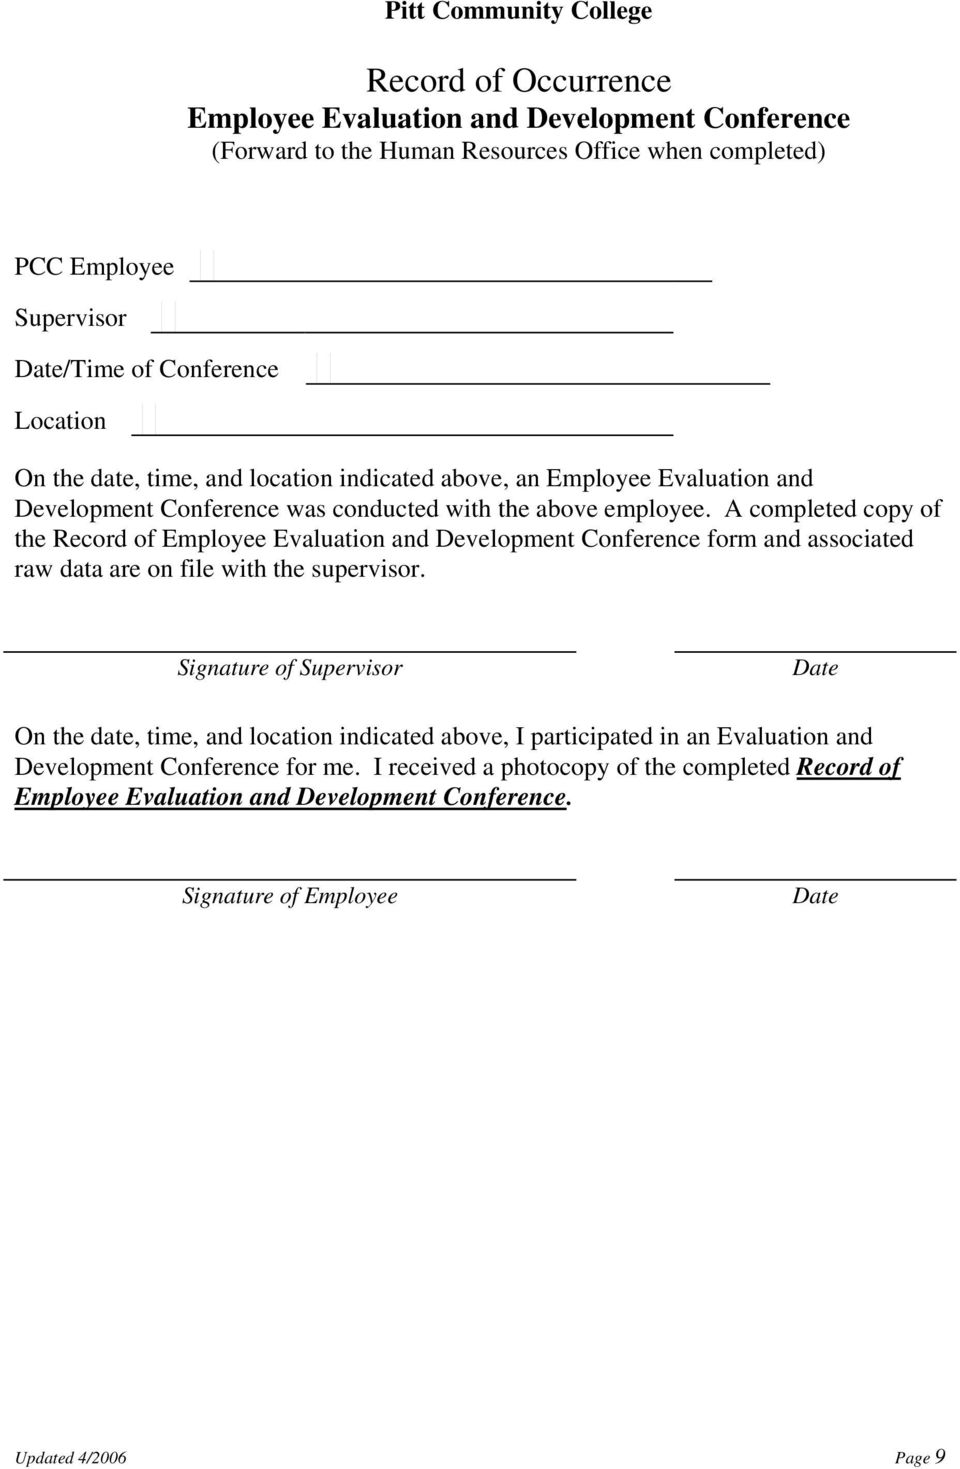 A completed copy of the Record of Employee Evaluation and Development Conference form and associated raw data are on file with the supervisor.